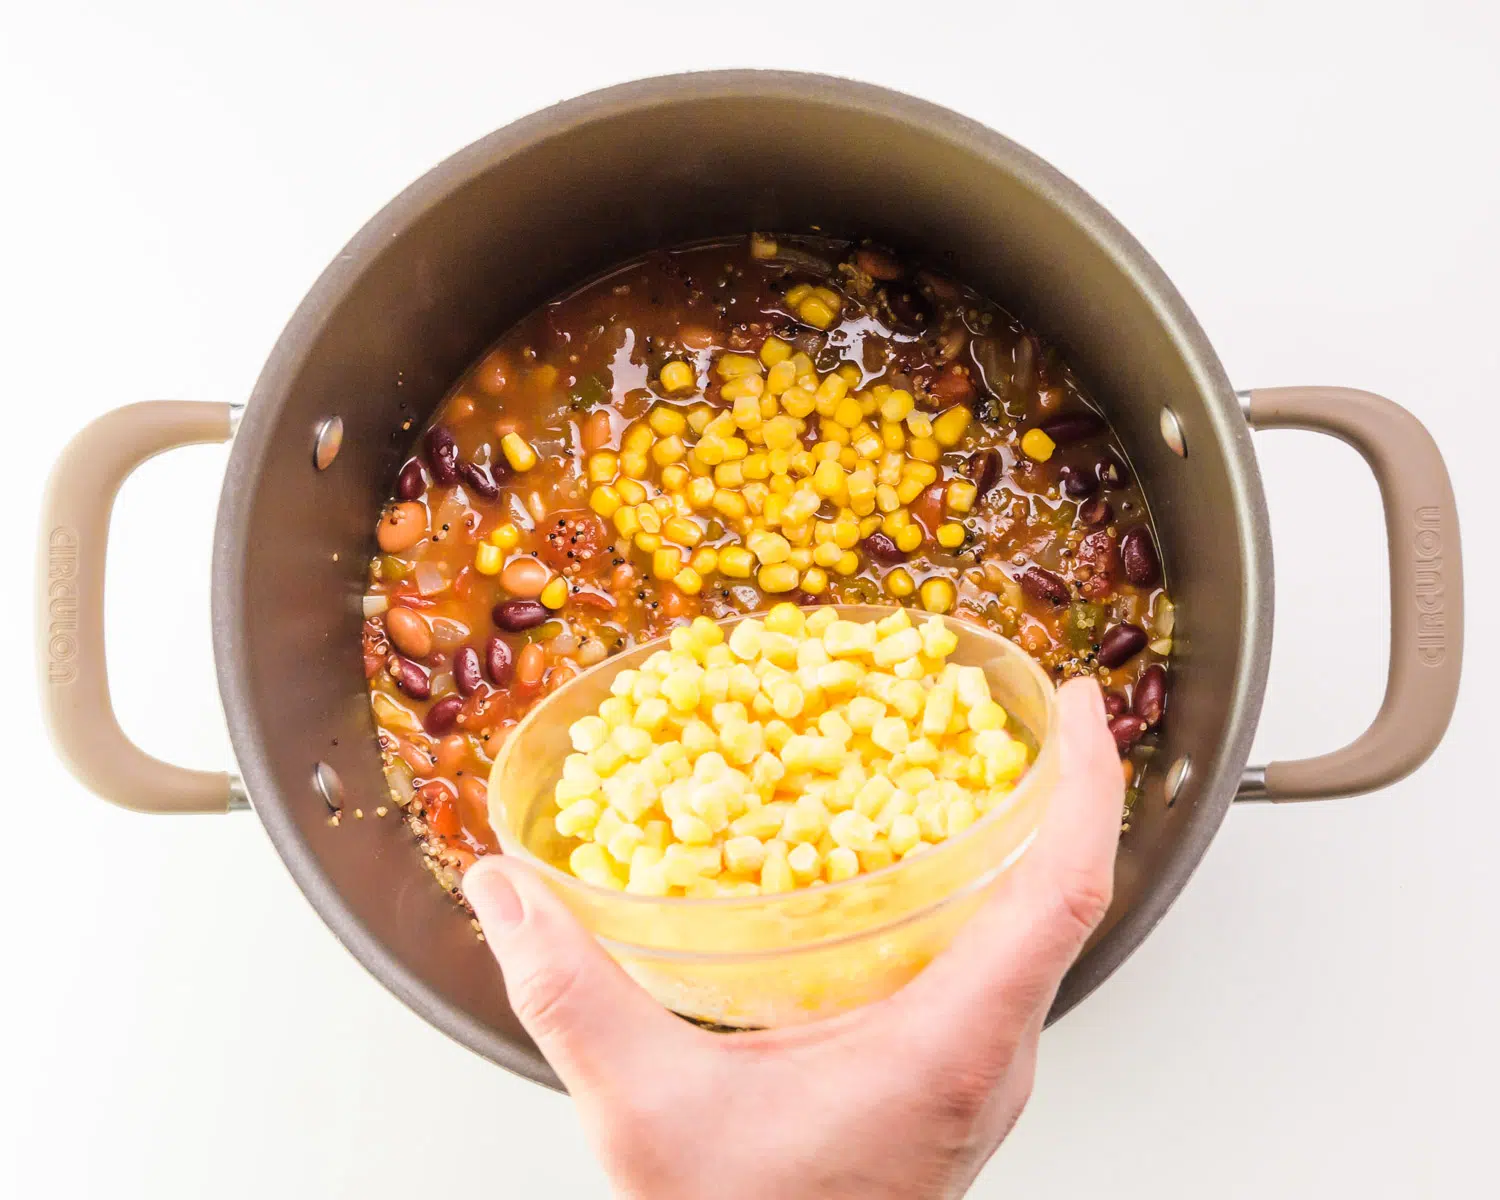 A hand holds a bowl of corn, pouring it into a pot with other soup ingredients.